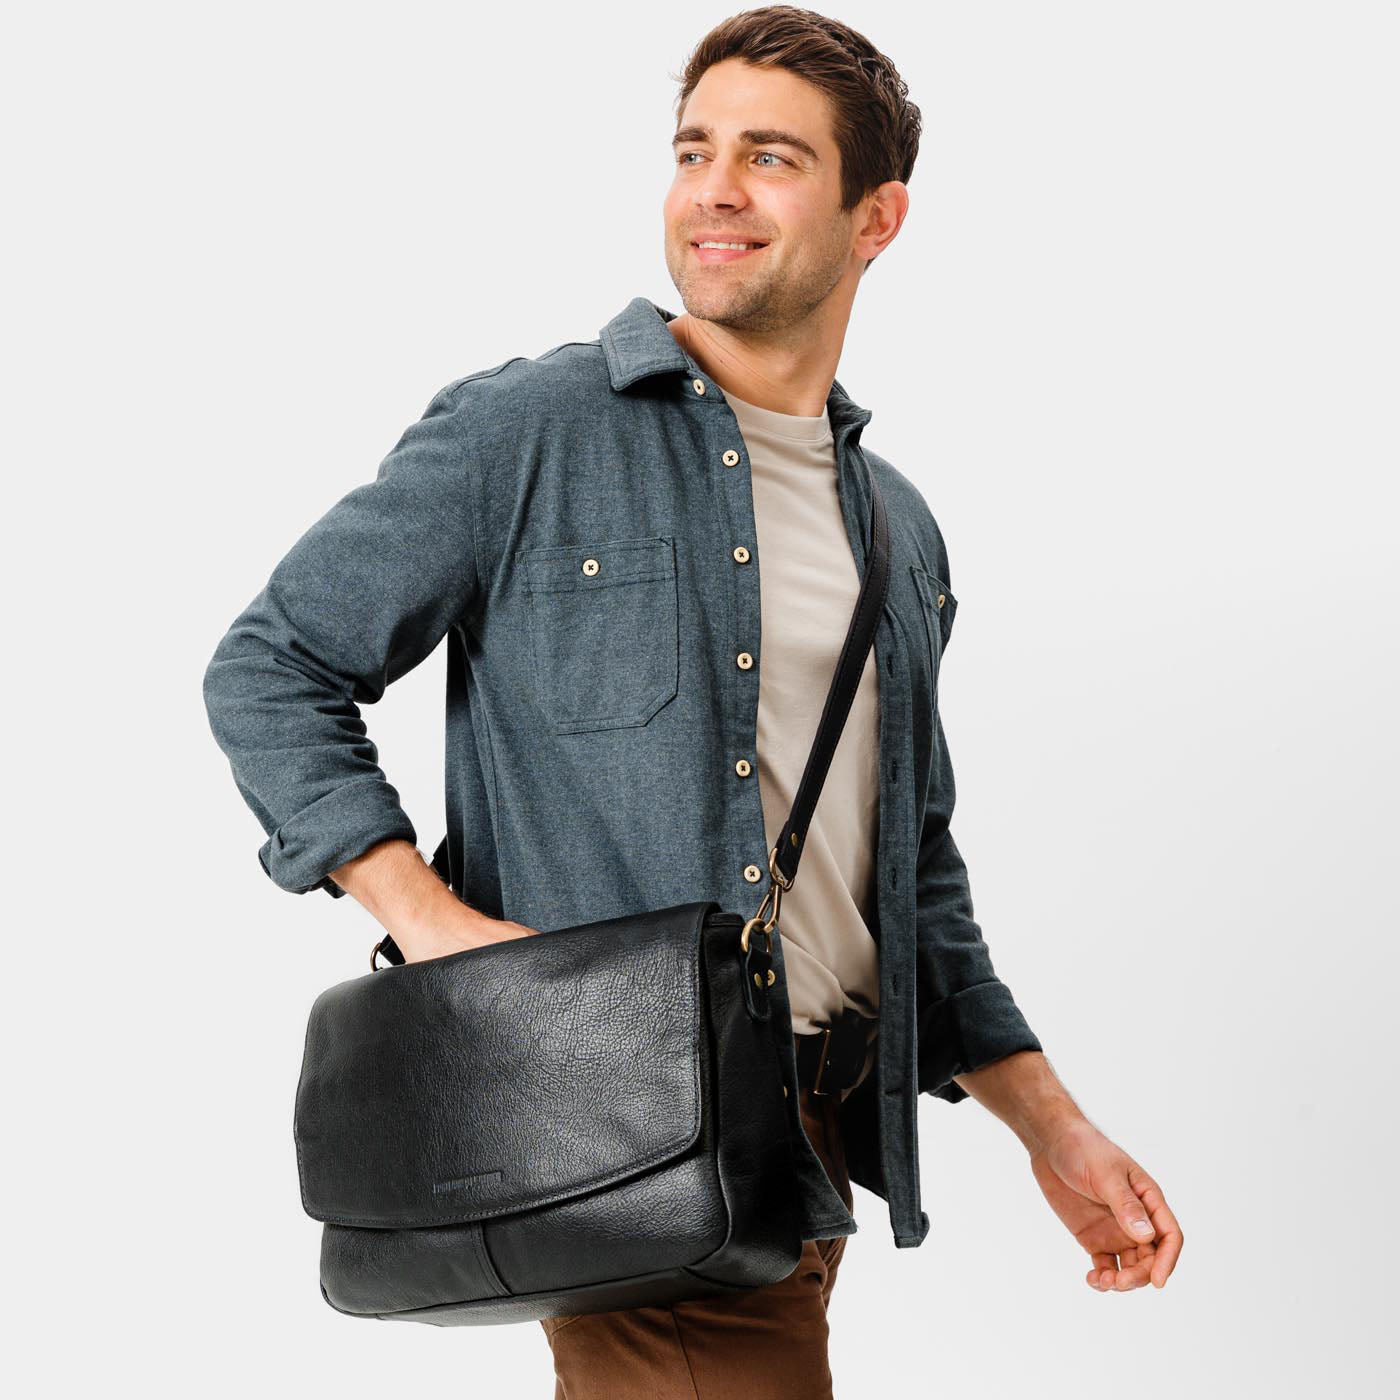 The Real Leather Company  Leather Messenger Bags for Men